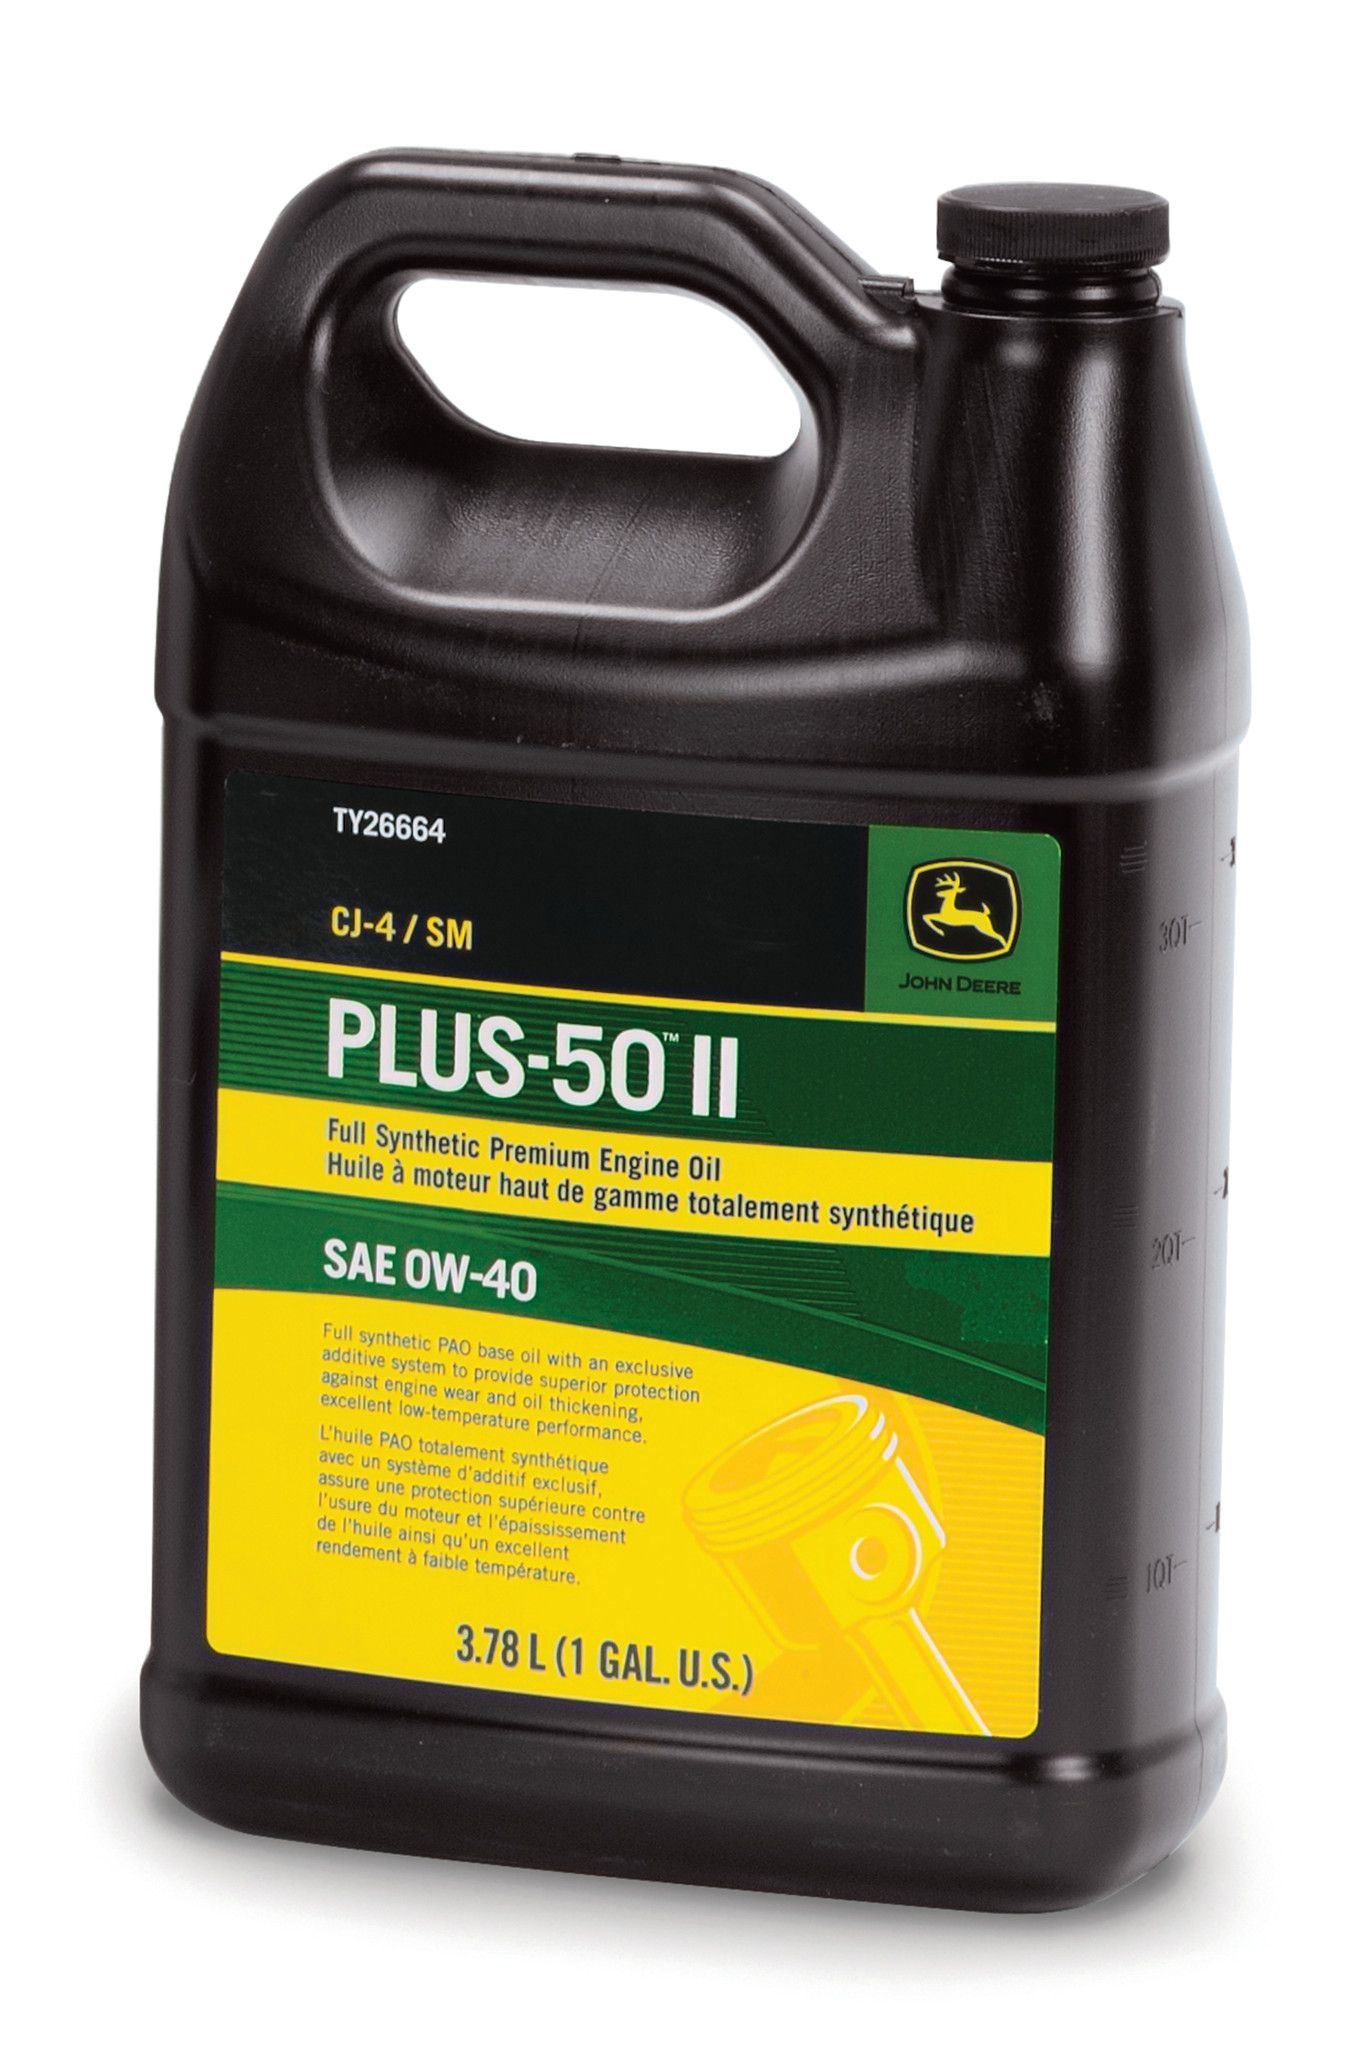 PLUS-50 II Engine Oil - 0W-40 - Full Synthetic - TY26664